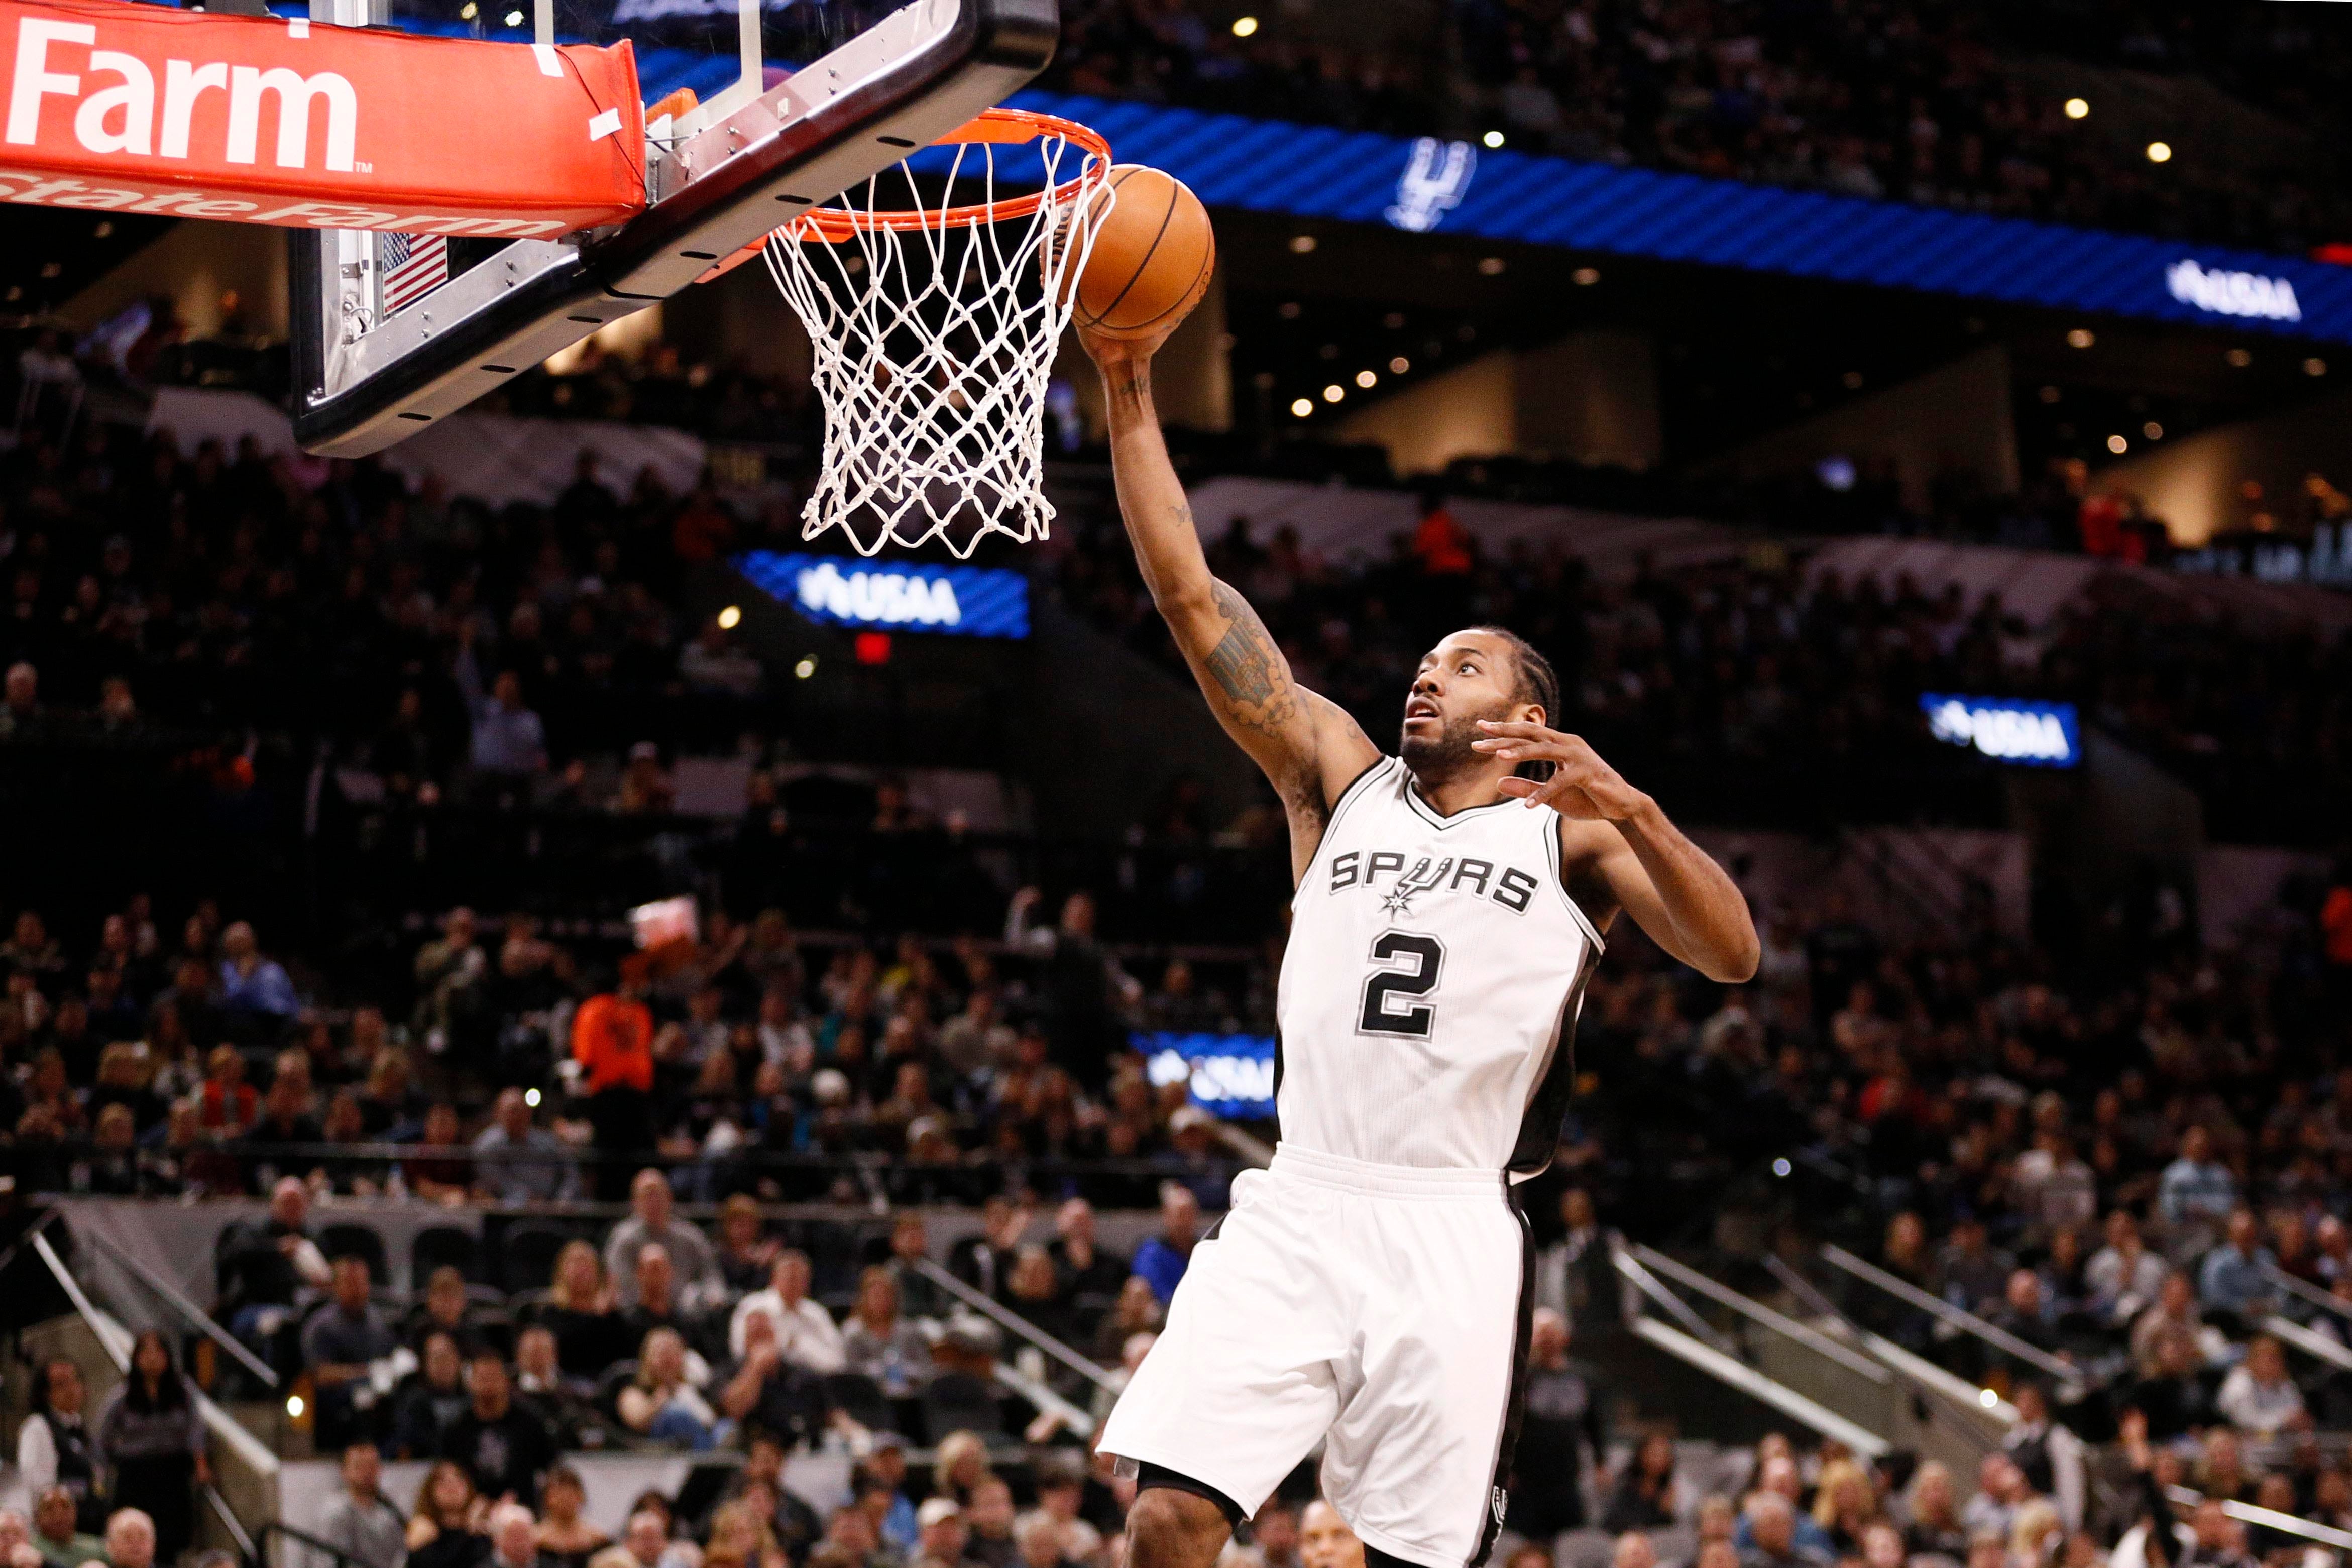 Is Saturday's Spurs-Cavs an NBA Finals preview?